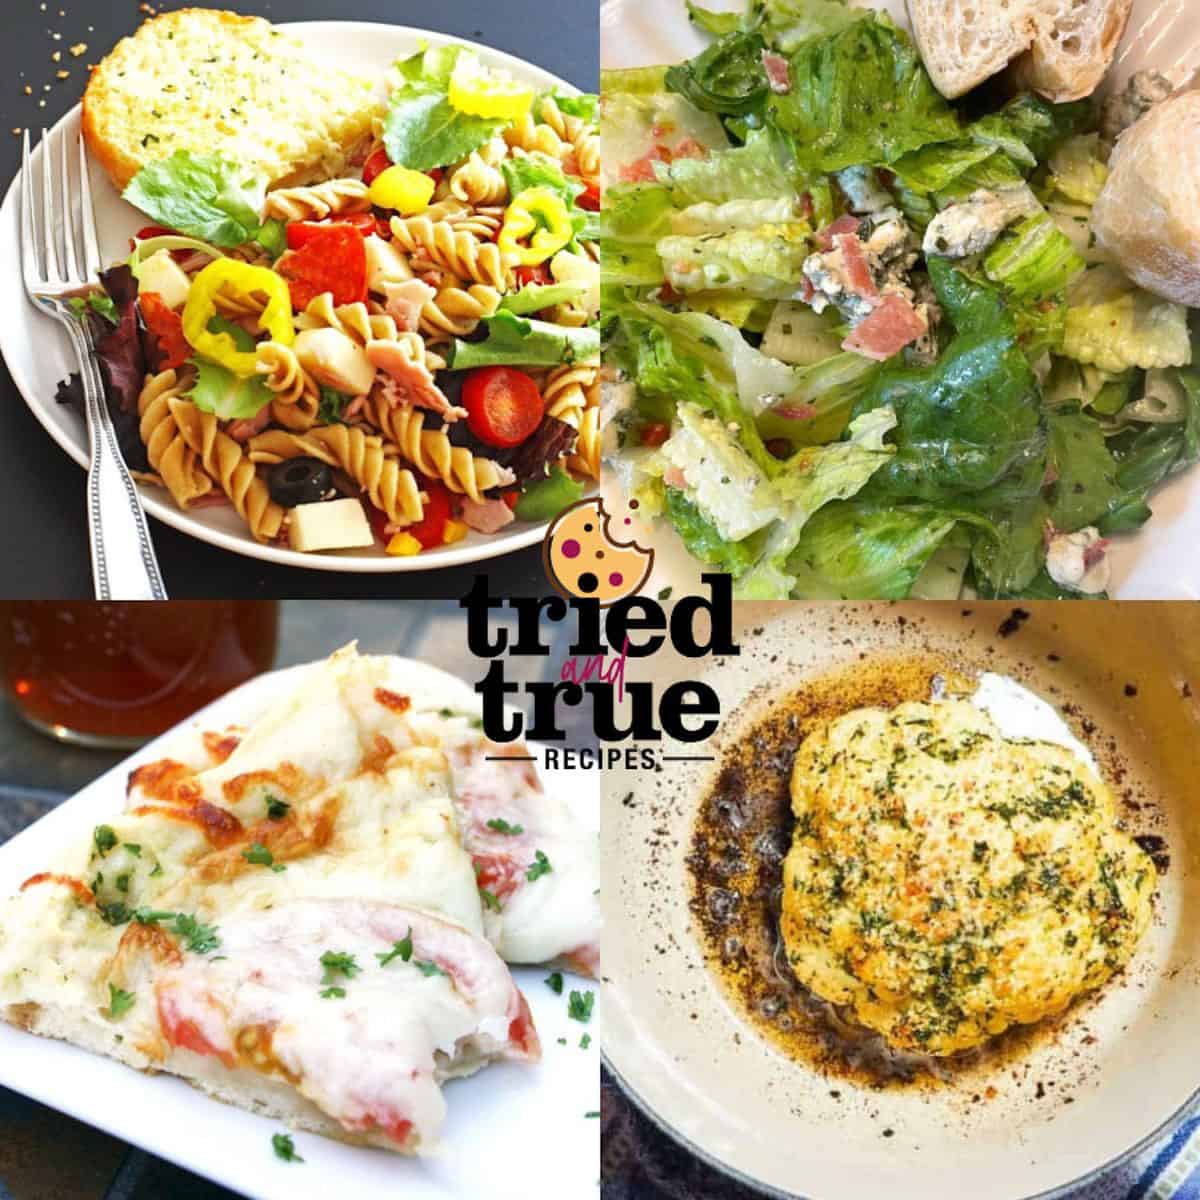 A collage of images showing healthy sides for pizza, roasted cauliflower, a side salad, and antipasto pasta salad with a white pizza.